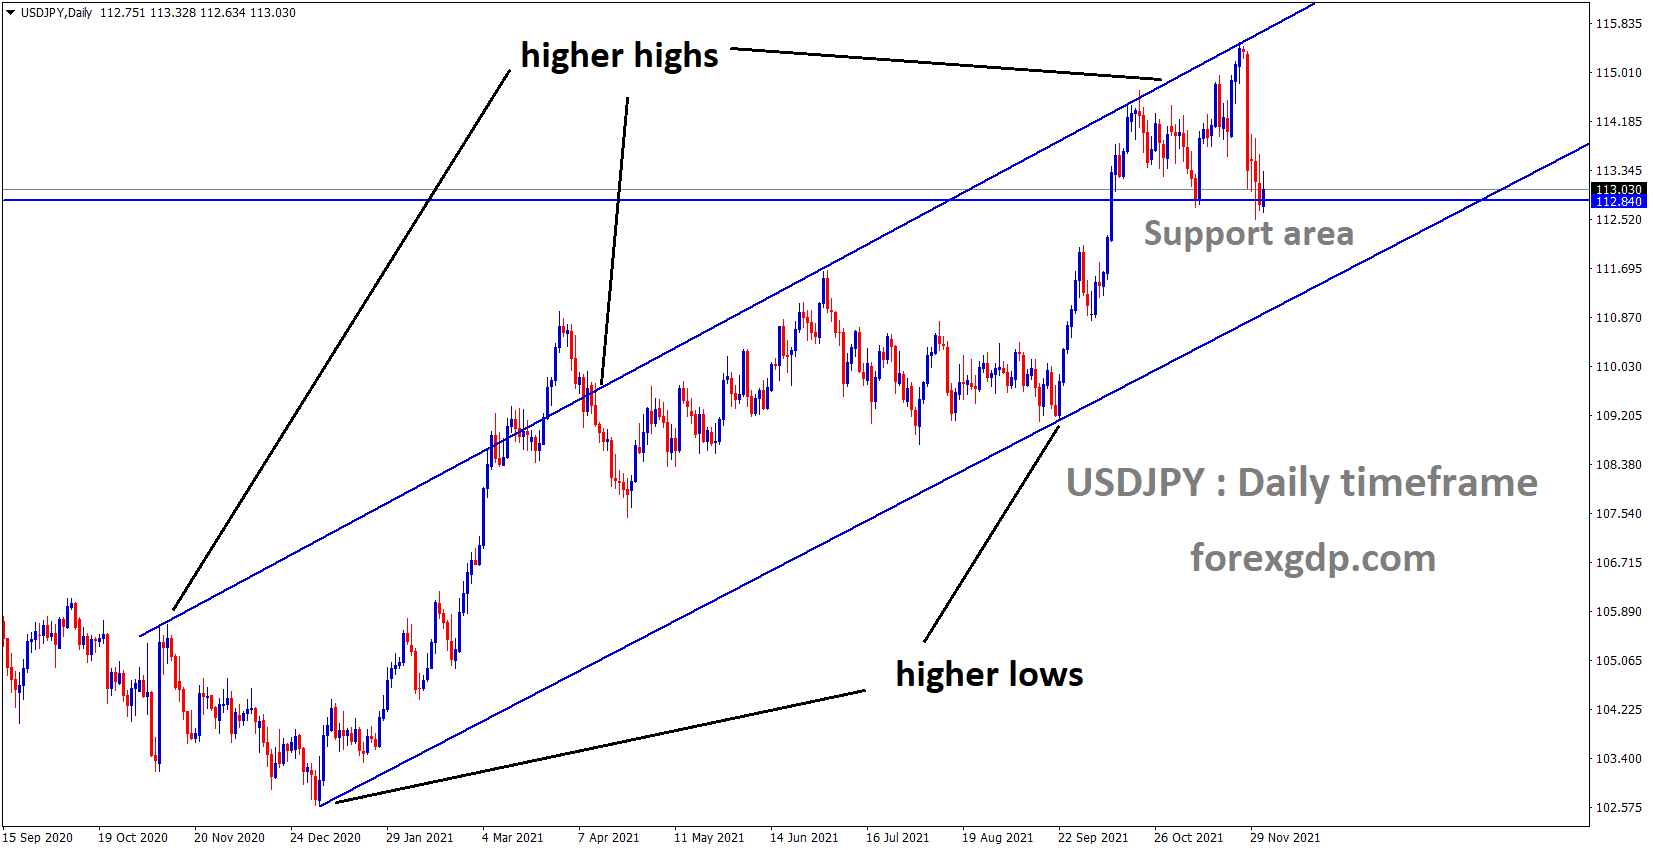 USDJPY is moving in an Ascending channel and the market reached the horizontal support area.